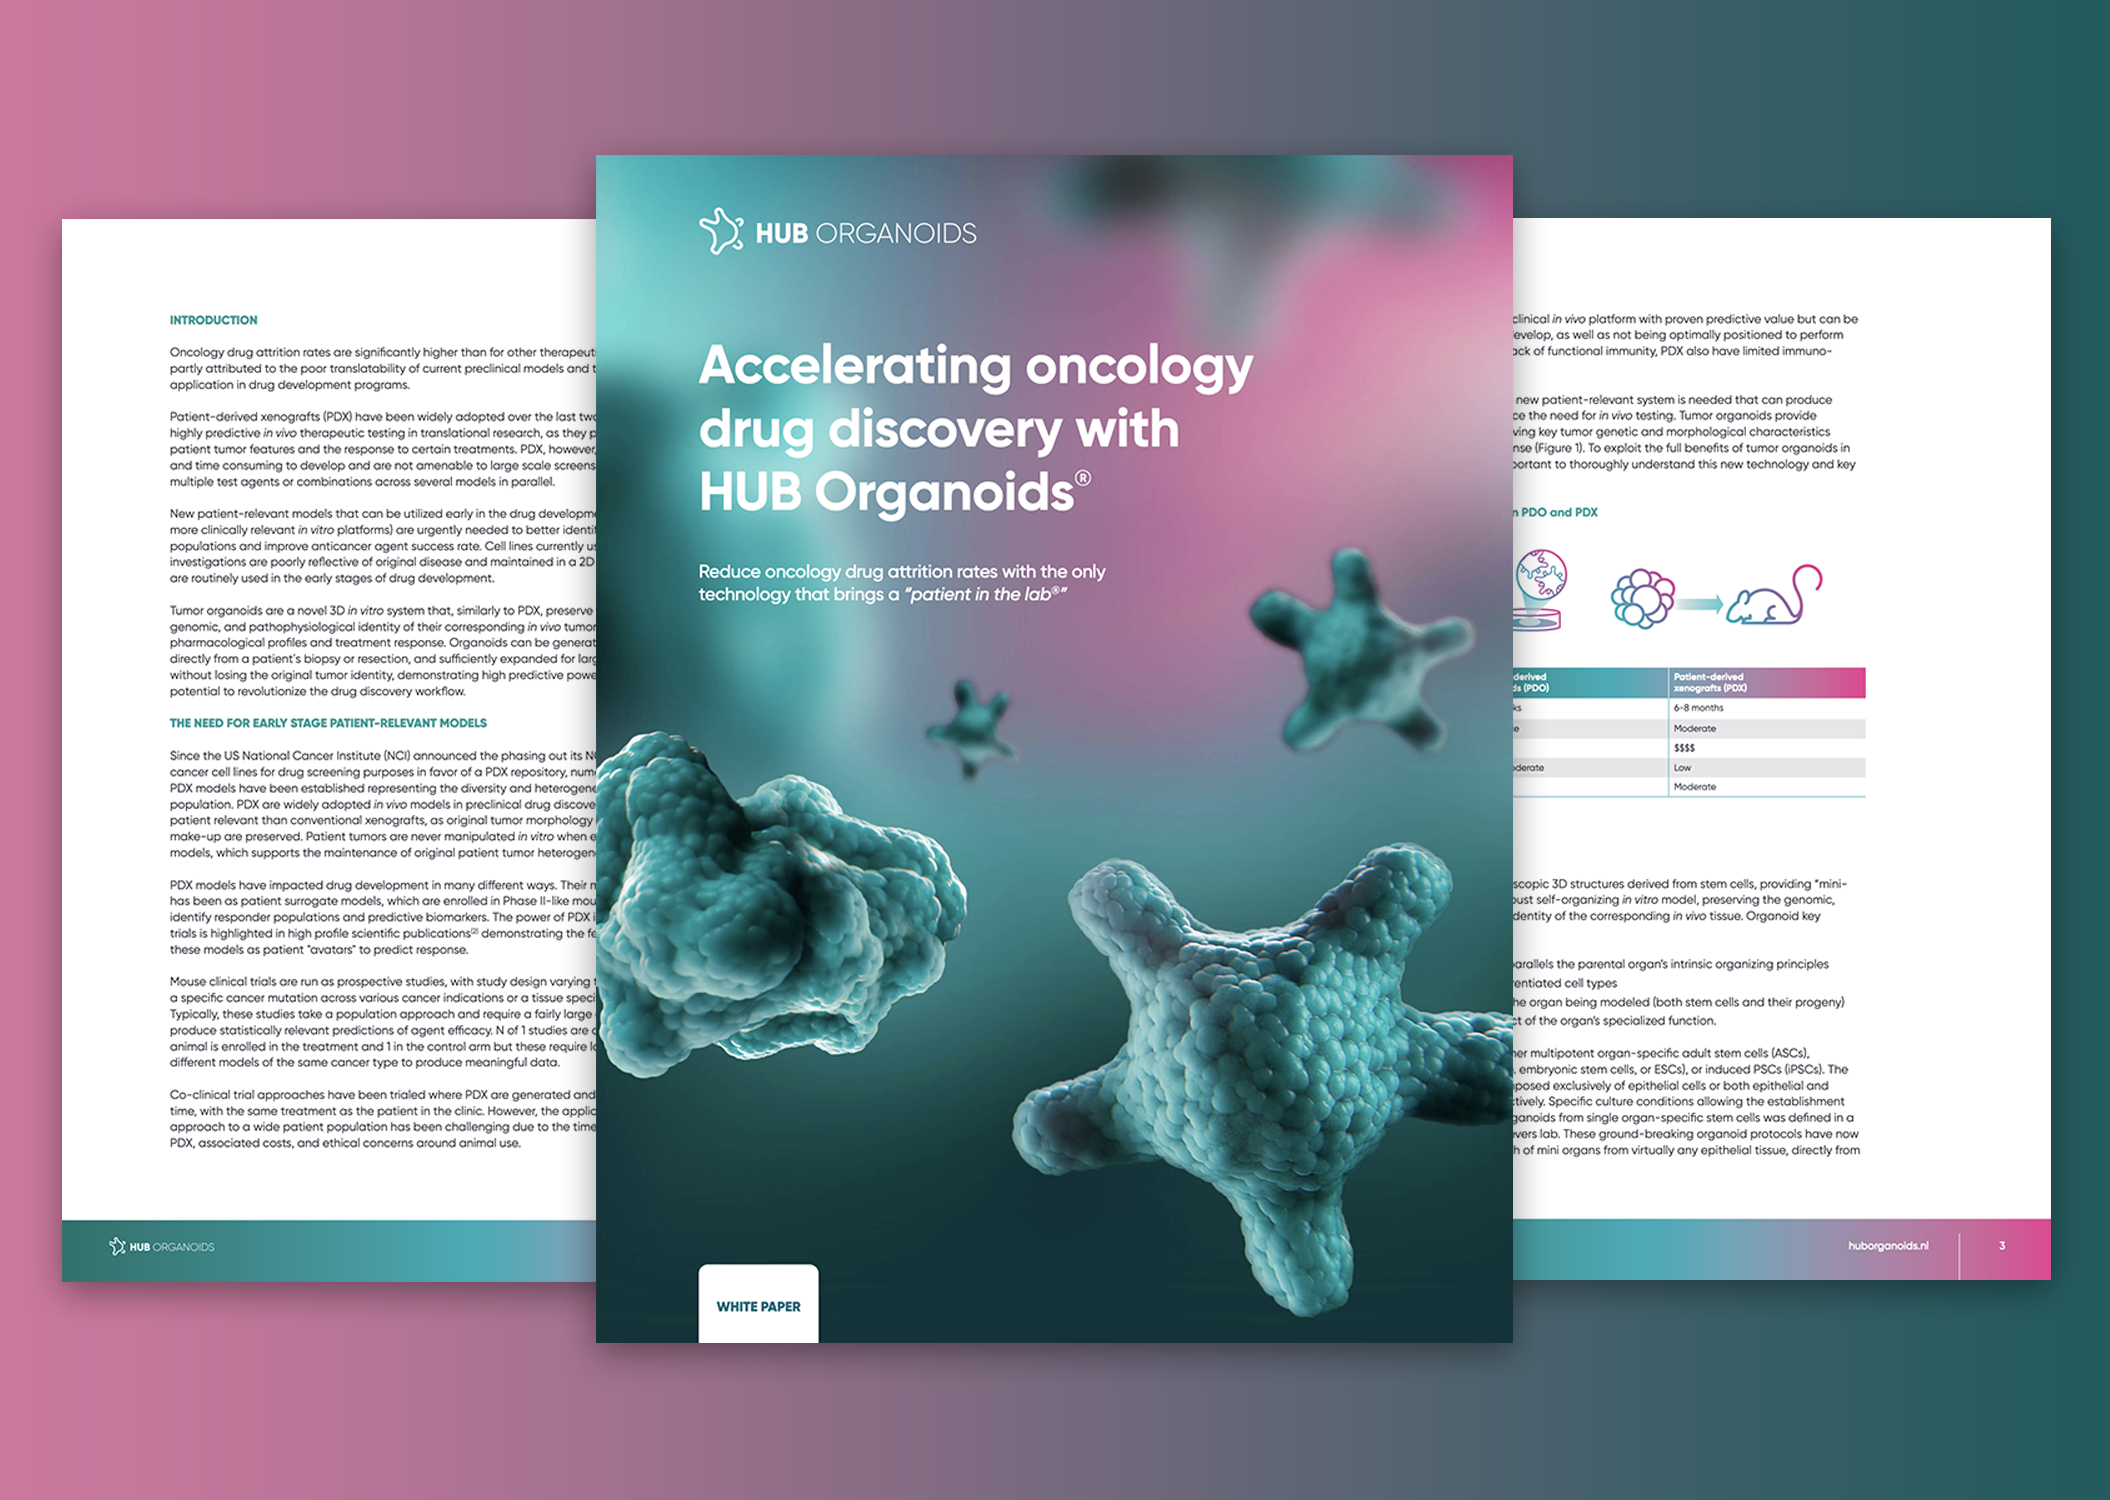 Accelerating oncology drug discovery with HUB Organoids®